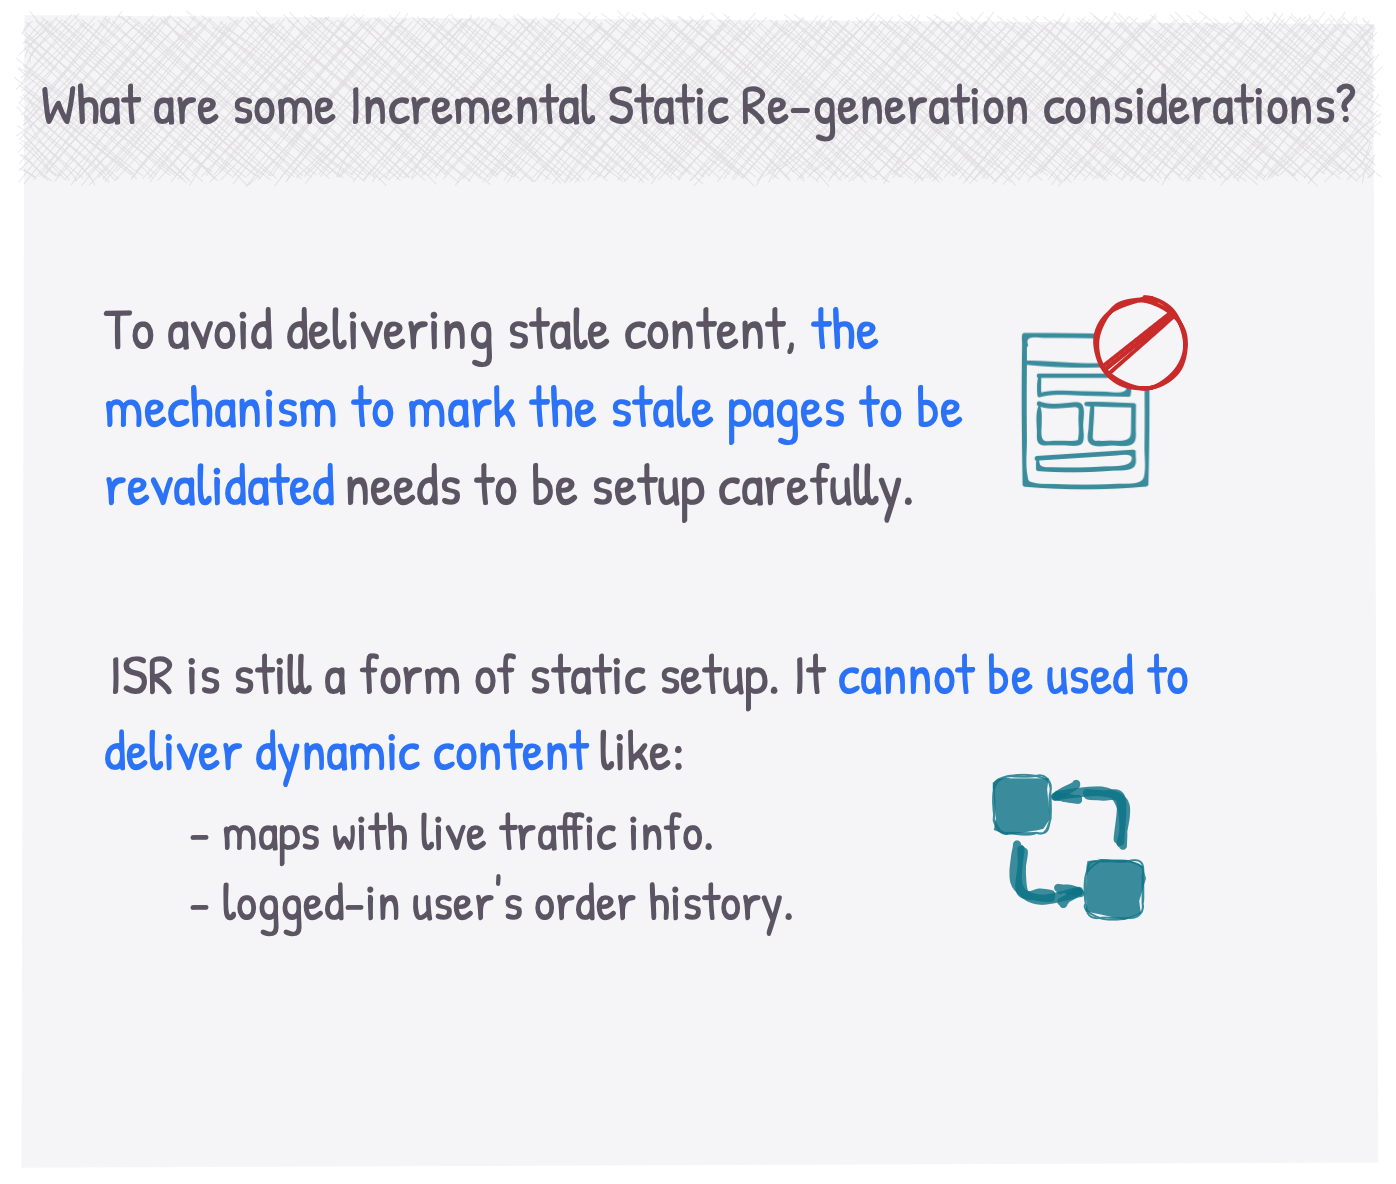 What are some Incremental Static Re-generation considerations?